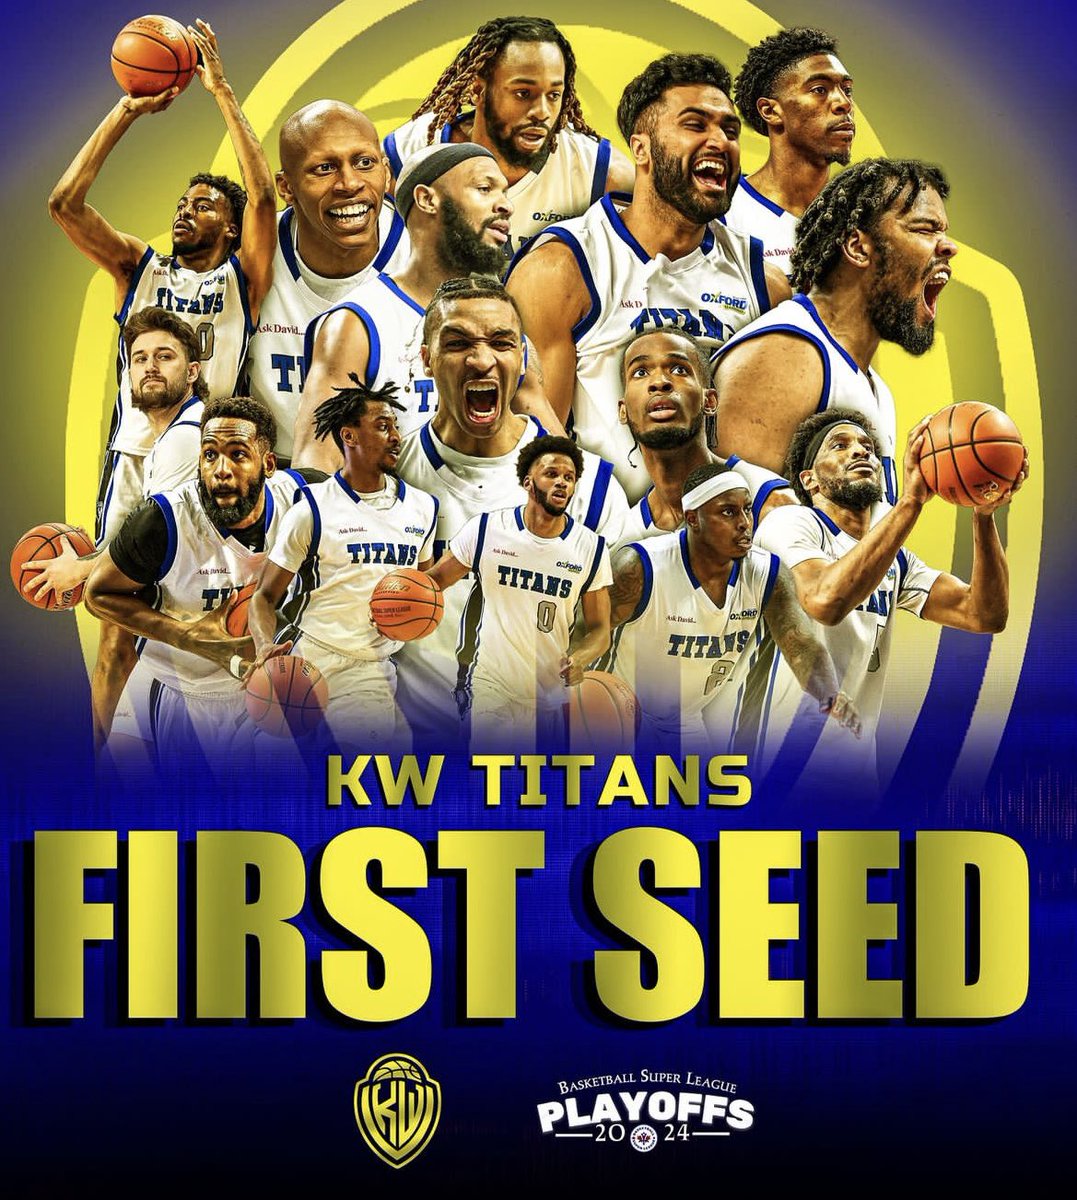 Number 1 Overall Seed For Playoffs Big Time Accomplishment Proud Of You Guys First Team To 20 Wins Now #1Seed Work Far From Done Stay Humble & Hungry @kw_titans